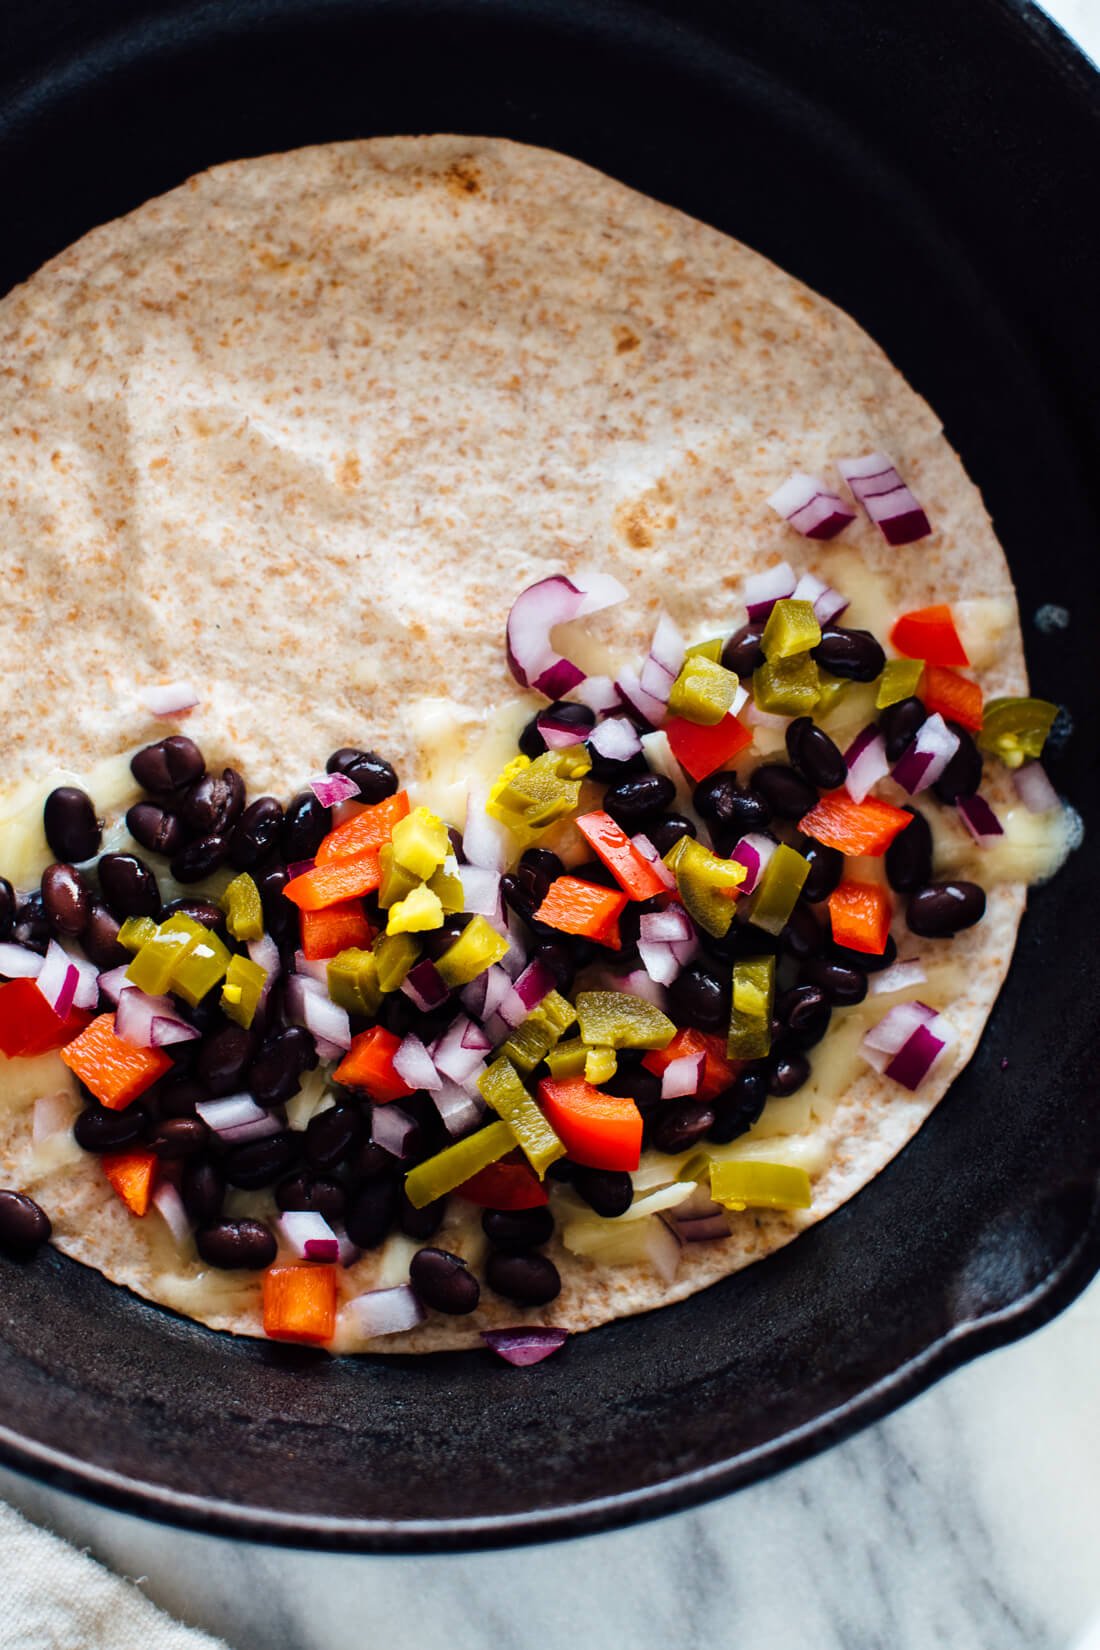 Learn how to make a quesadilla in 10 minutes! cookieandkate.com